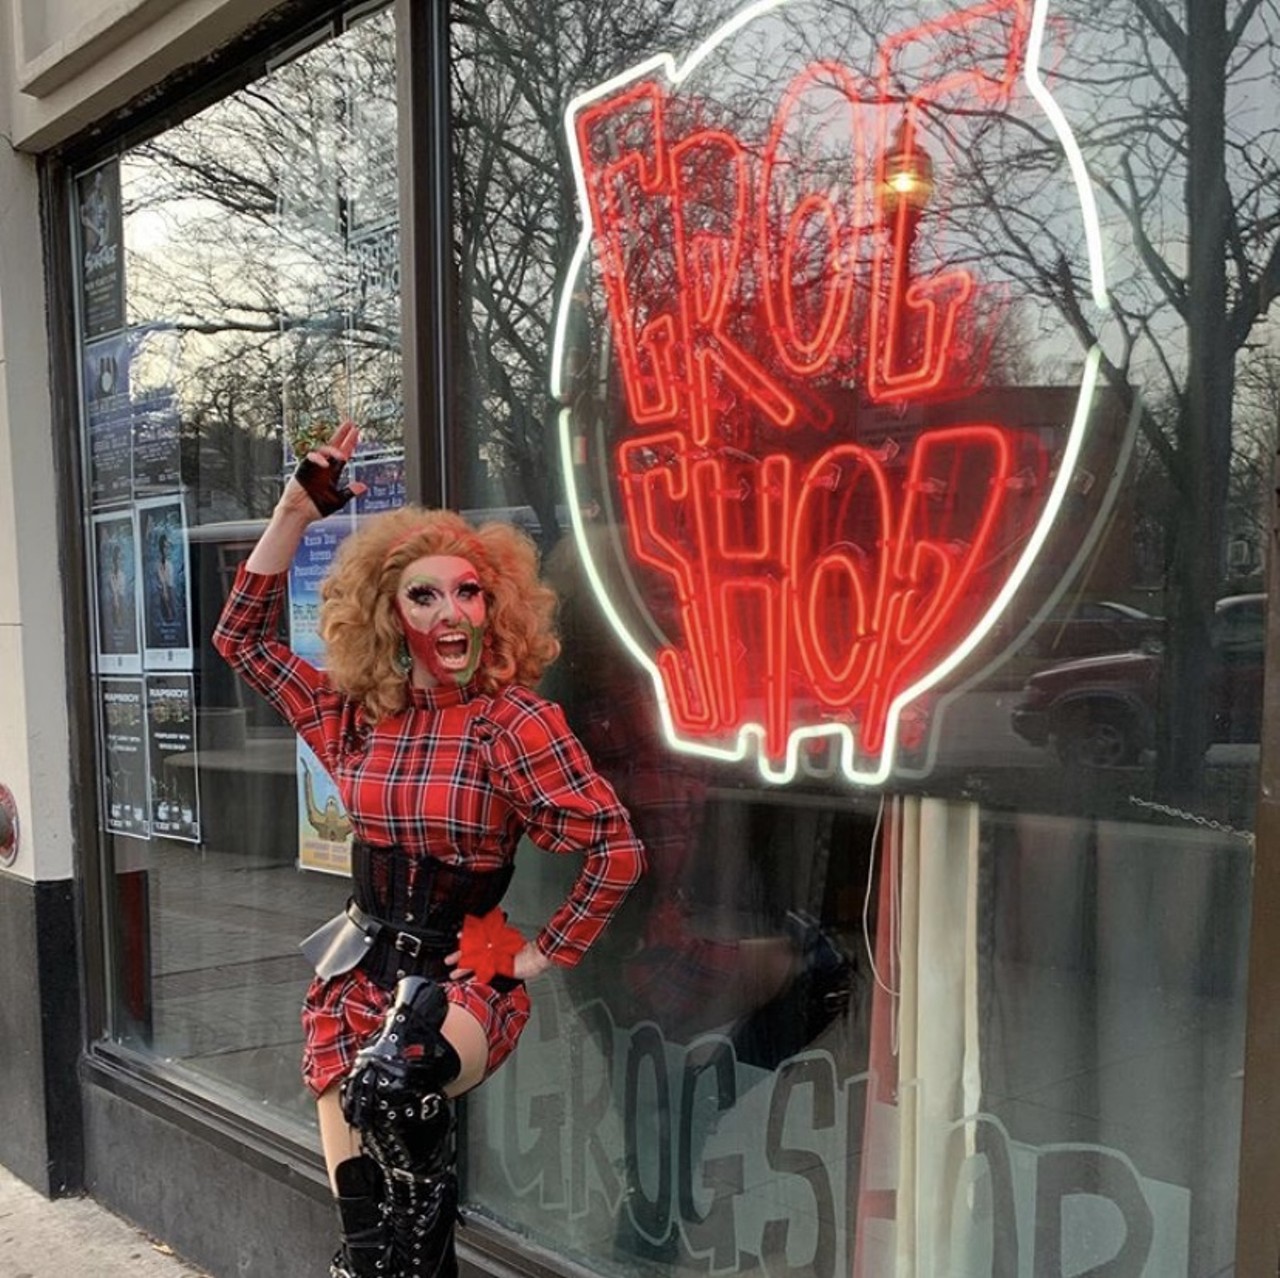 GlamGore Monthly Drag Shows 
Grog Shop, 2785 Euclid Heights Blvd., Cleveland Heights, 216-321-5588
Every month, Anhedonia Delight presents legendary drag shows at the Grog Shop, including a cast of performers you and your date will find entertaining. 
Photo via @anhedoniadelight/Instagram